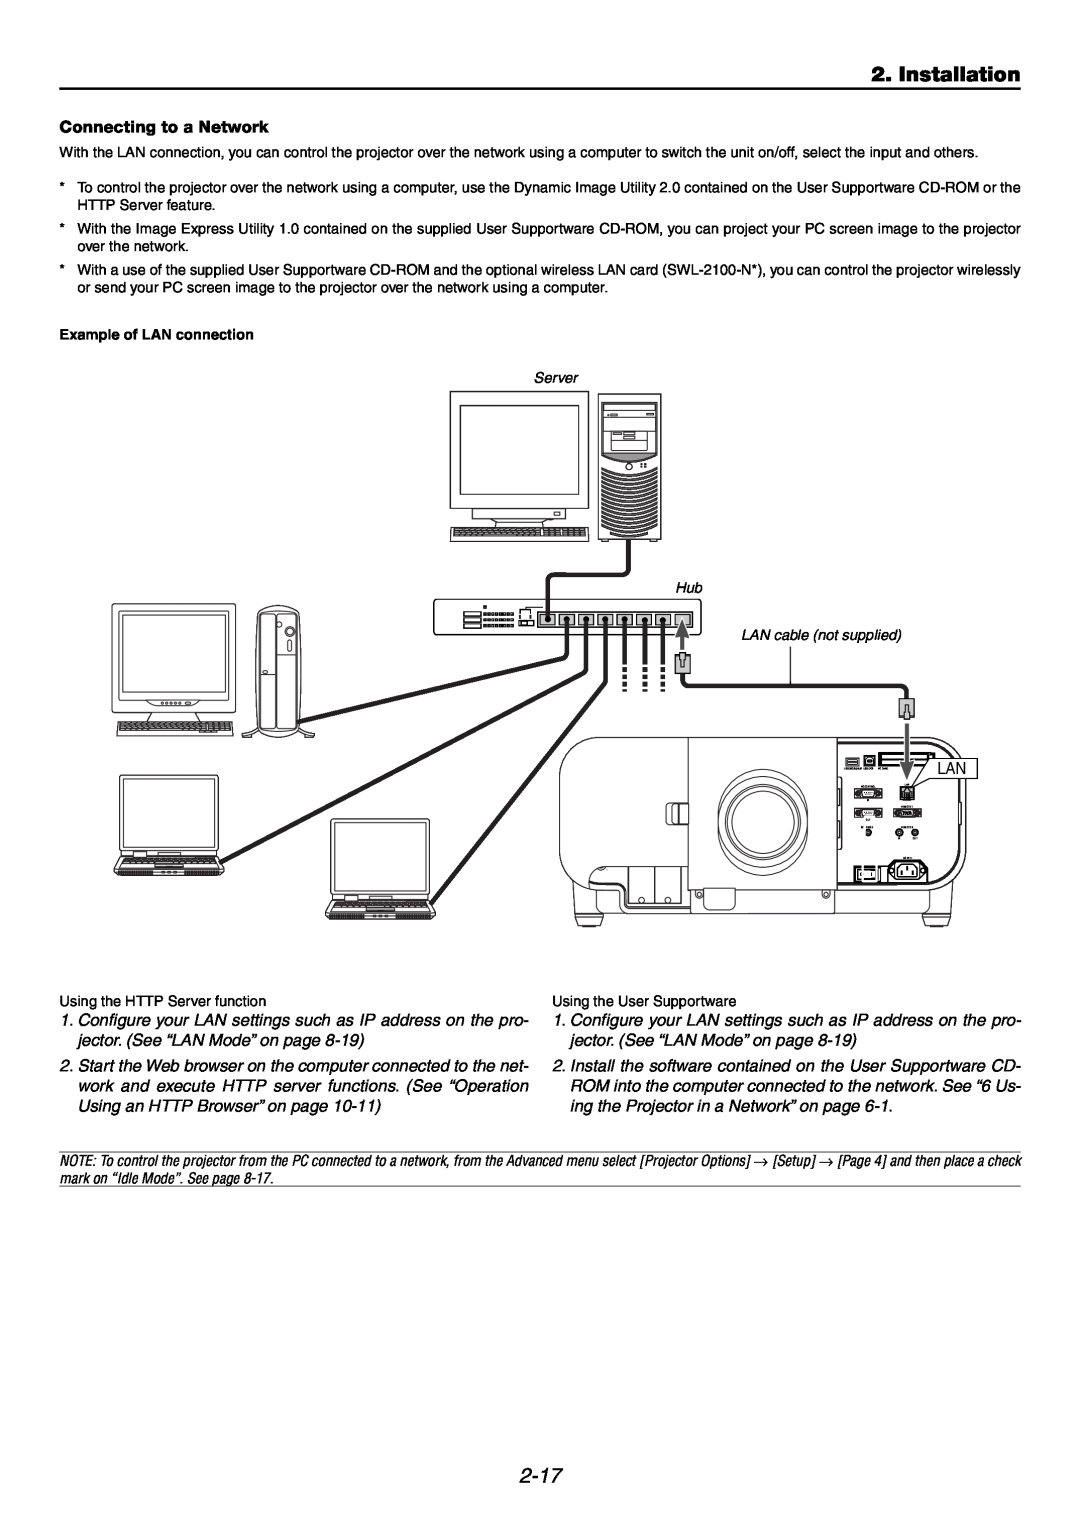 NEC GT6000 user manual Installation, 2-17, Connecting to a Network, Example of LAN connection 